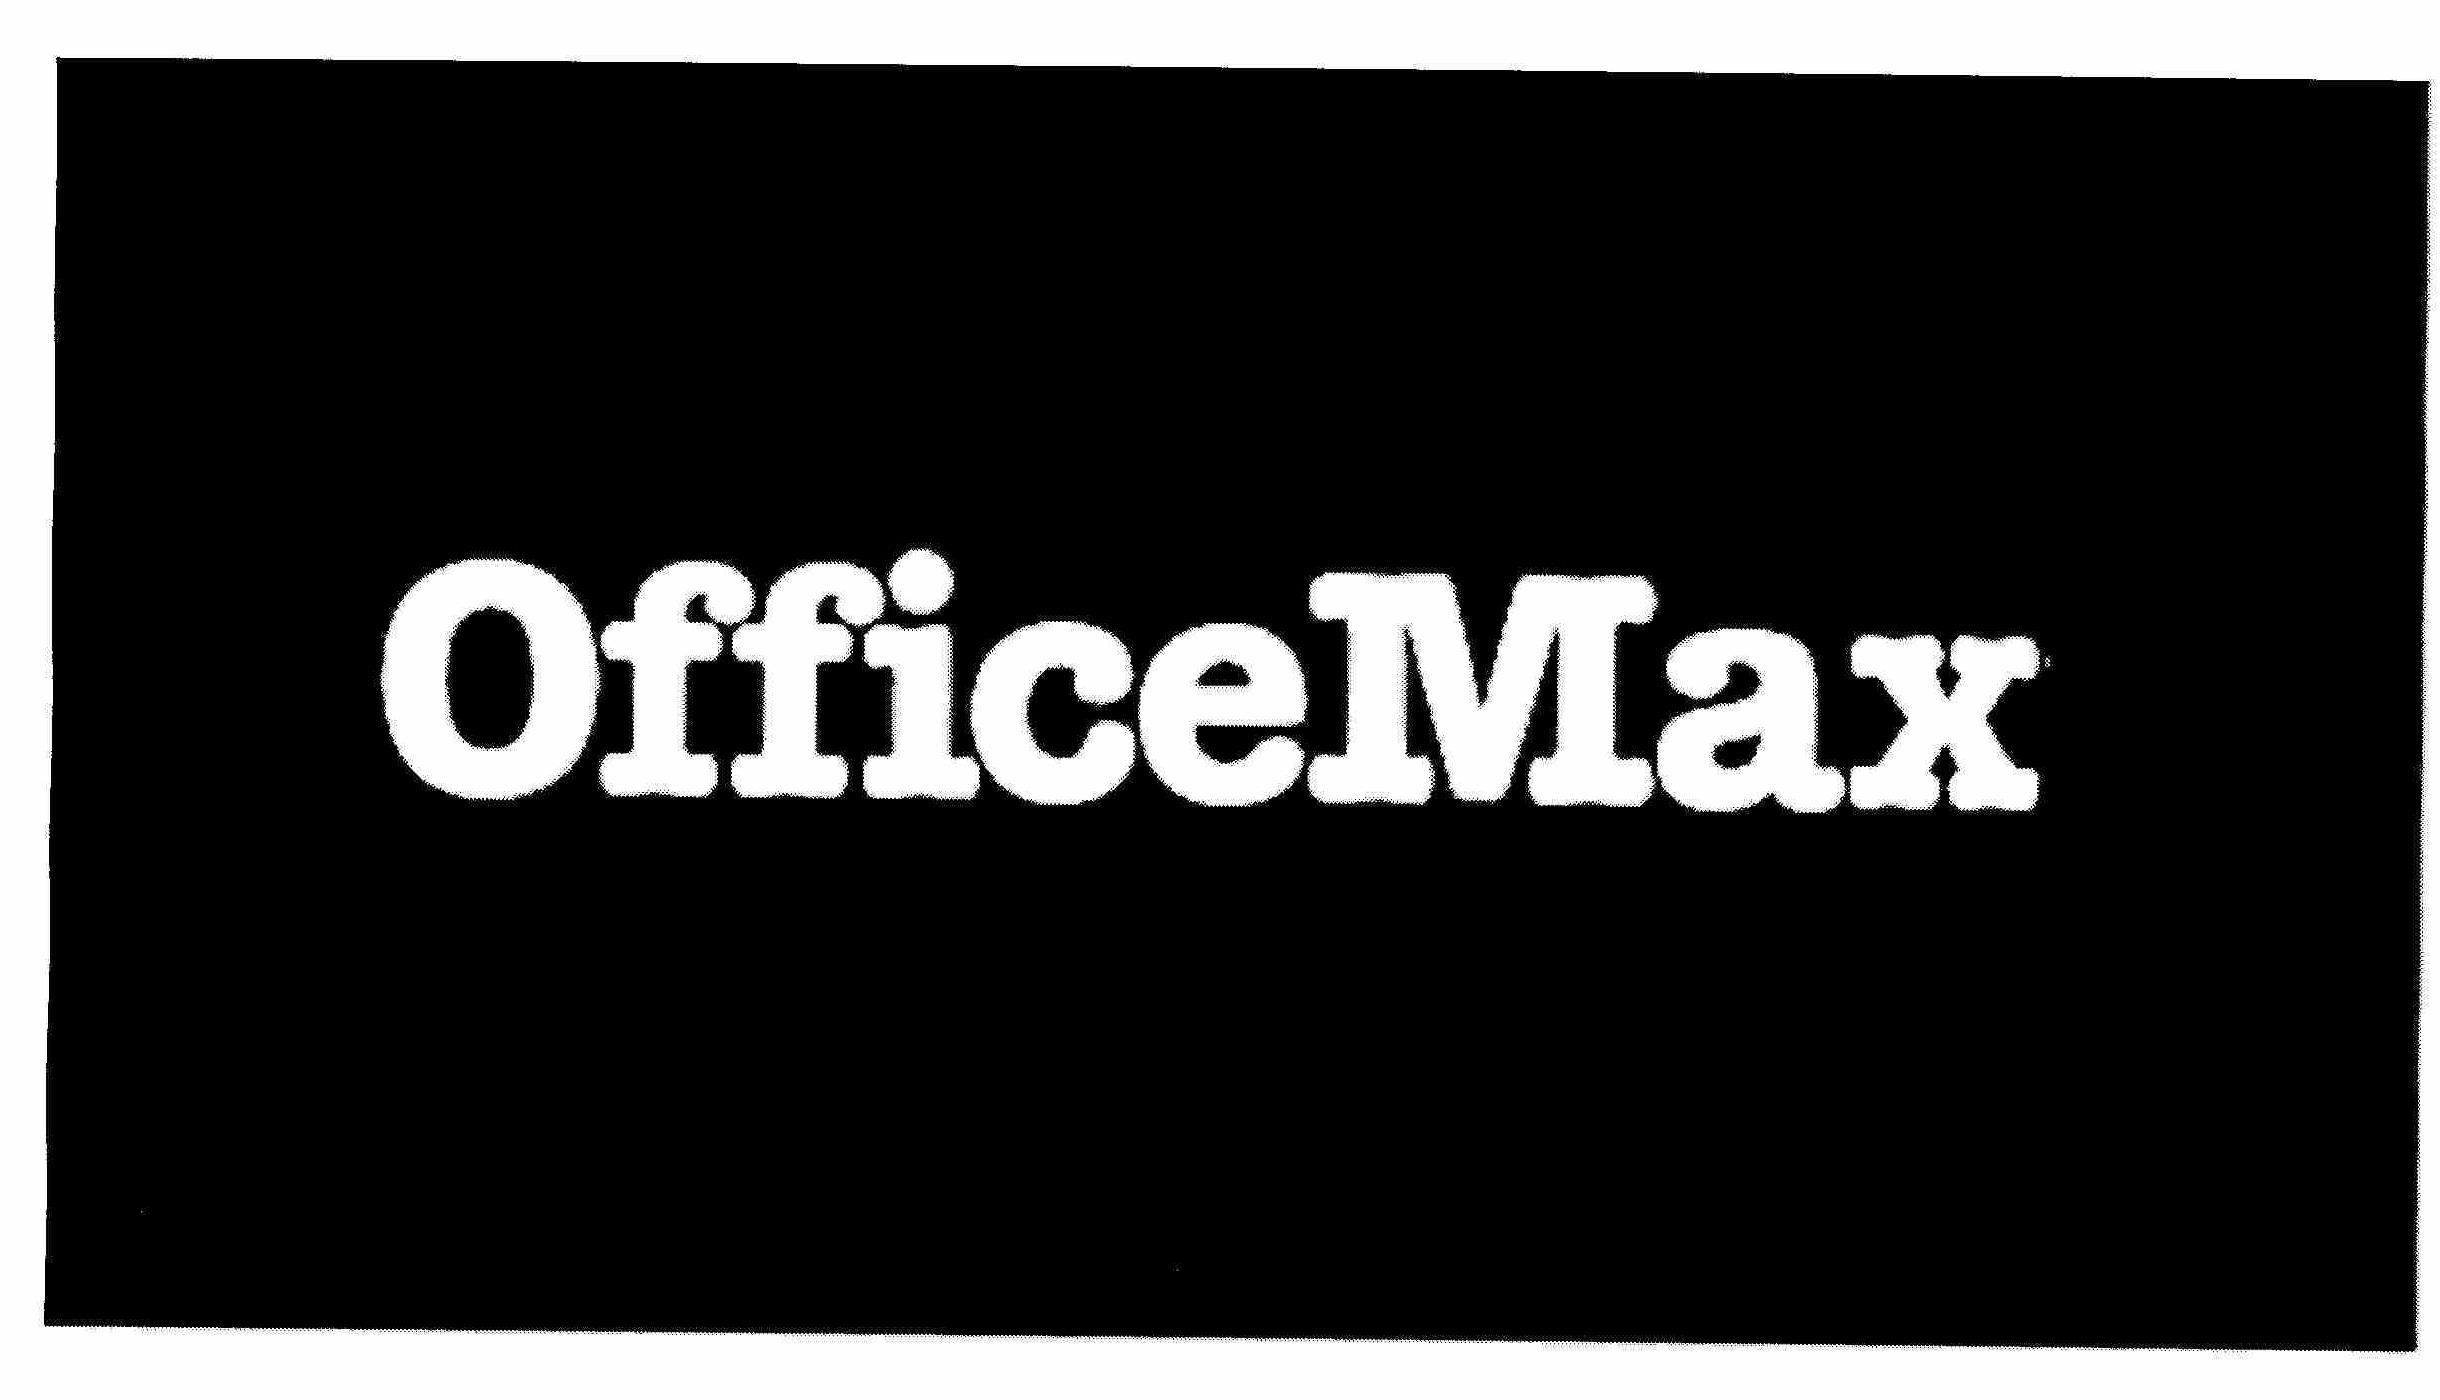 OFFICEMAX